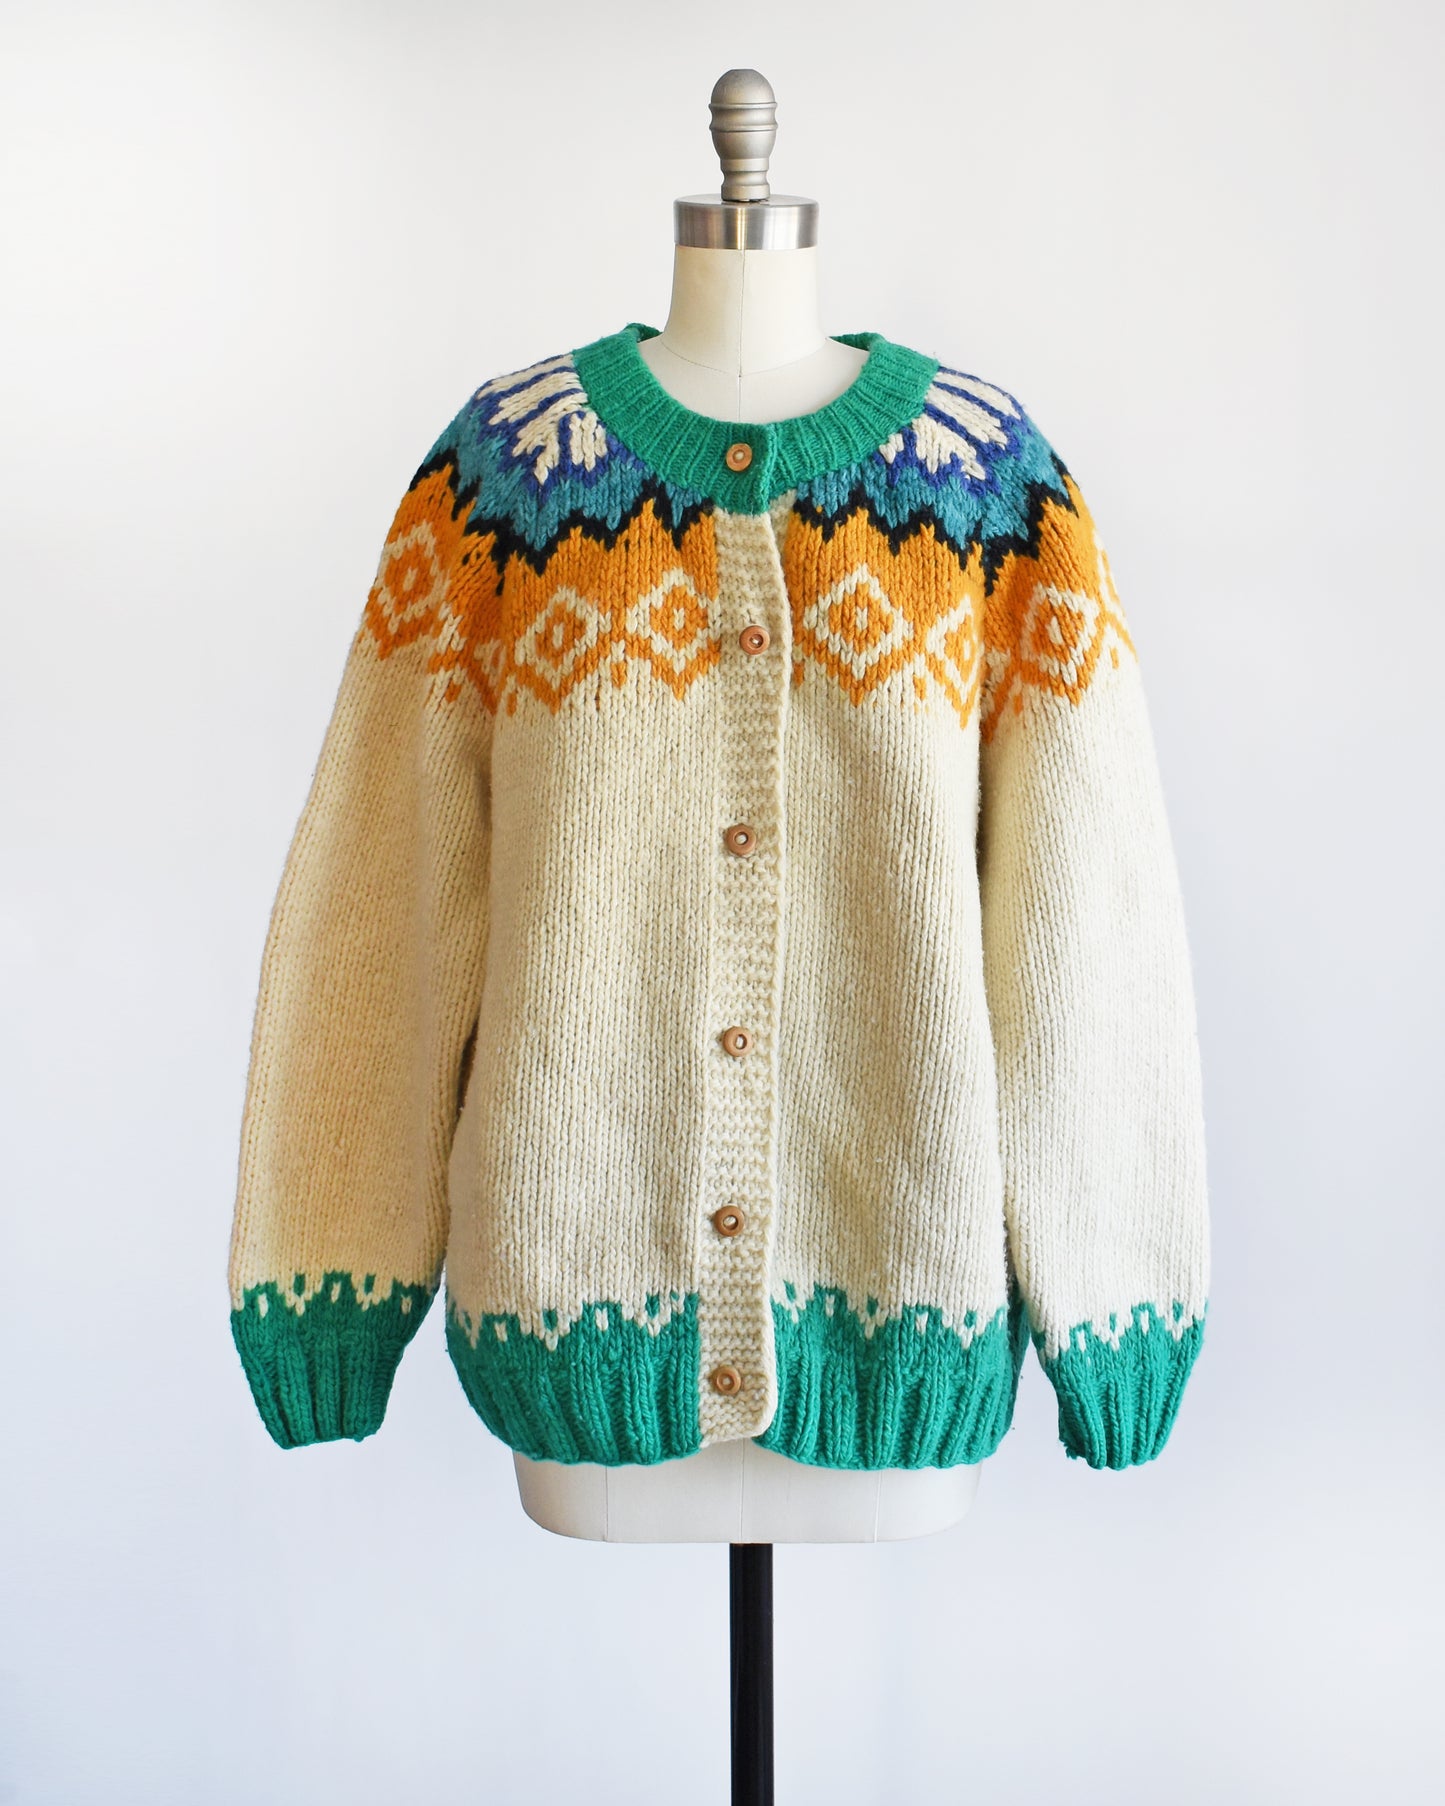 A vintage 1970s cream wool cardigan with bright green, dark blue, light blue, black, cream, and light orange Fair Isle pattern around the collar, and wood buttons on the front.